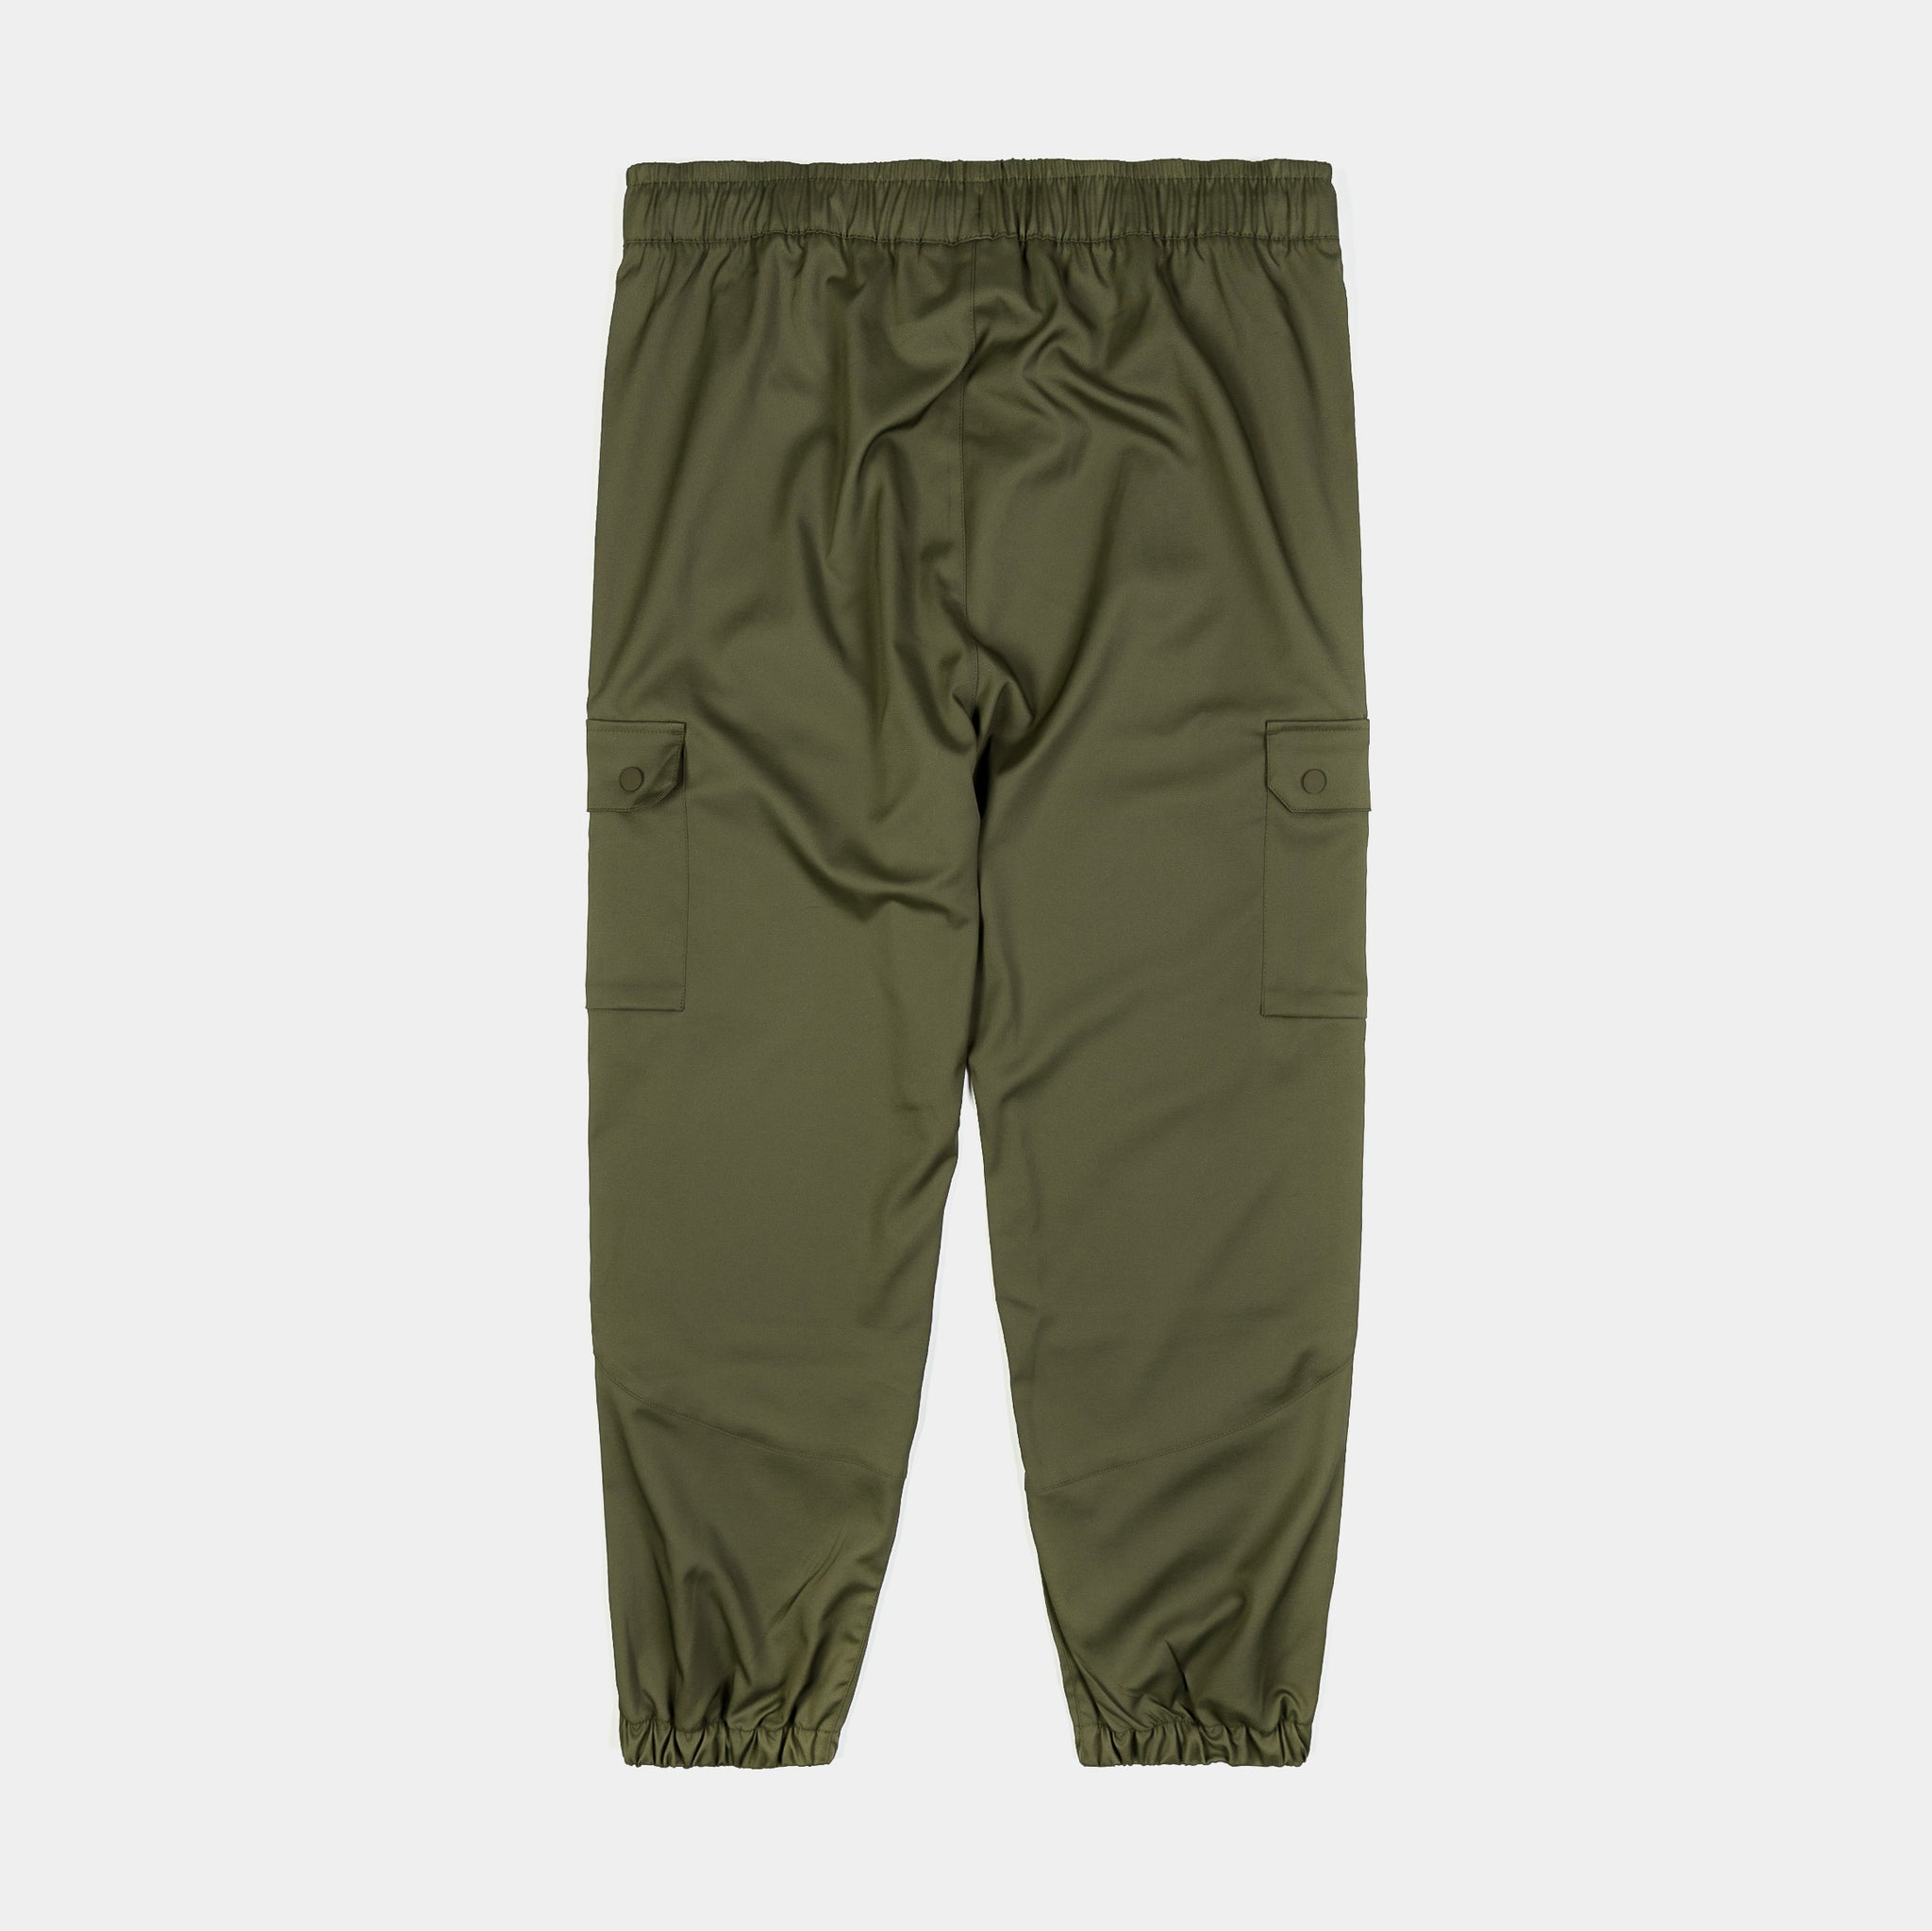 Woven Cargo Mens Pants (Olive)